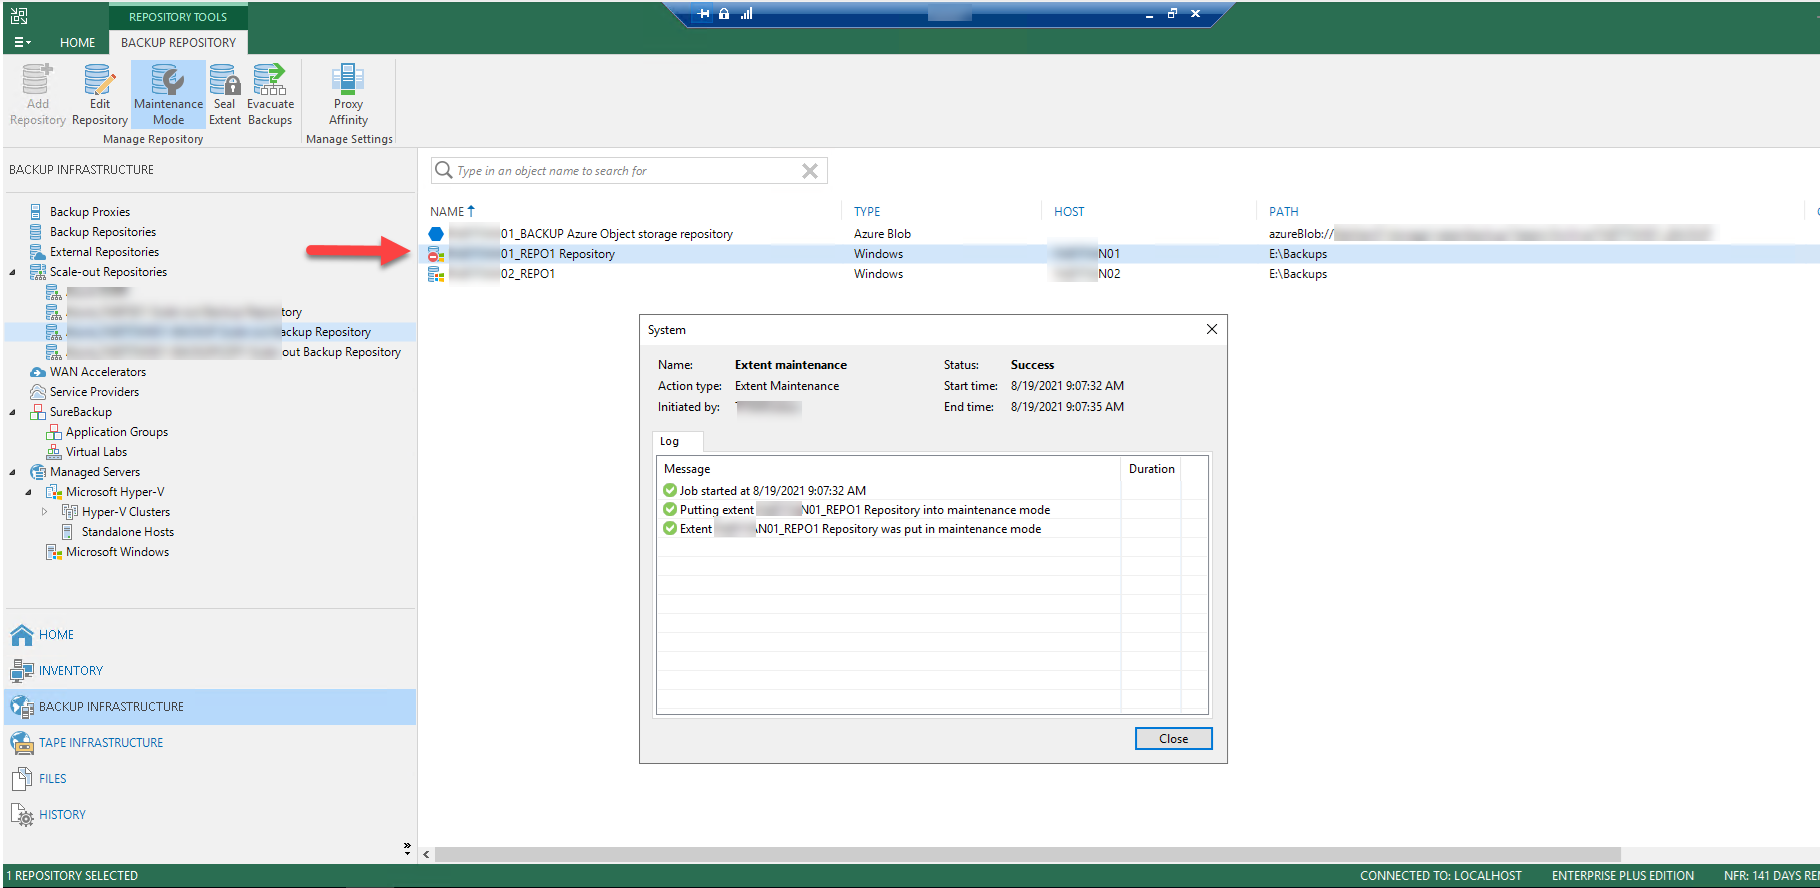 121121 1917 HowtomoveVe11 - How to move Veeam SOBR Performance Tier to another Server (repository)